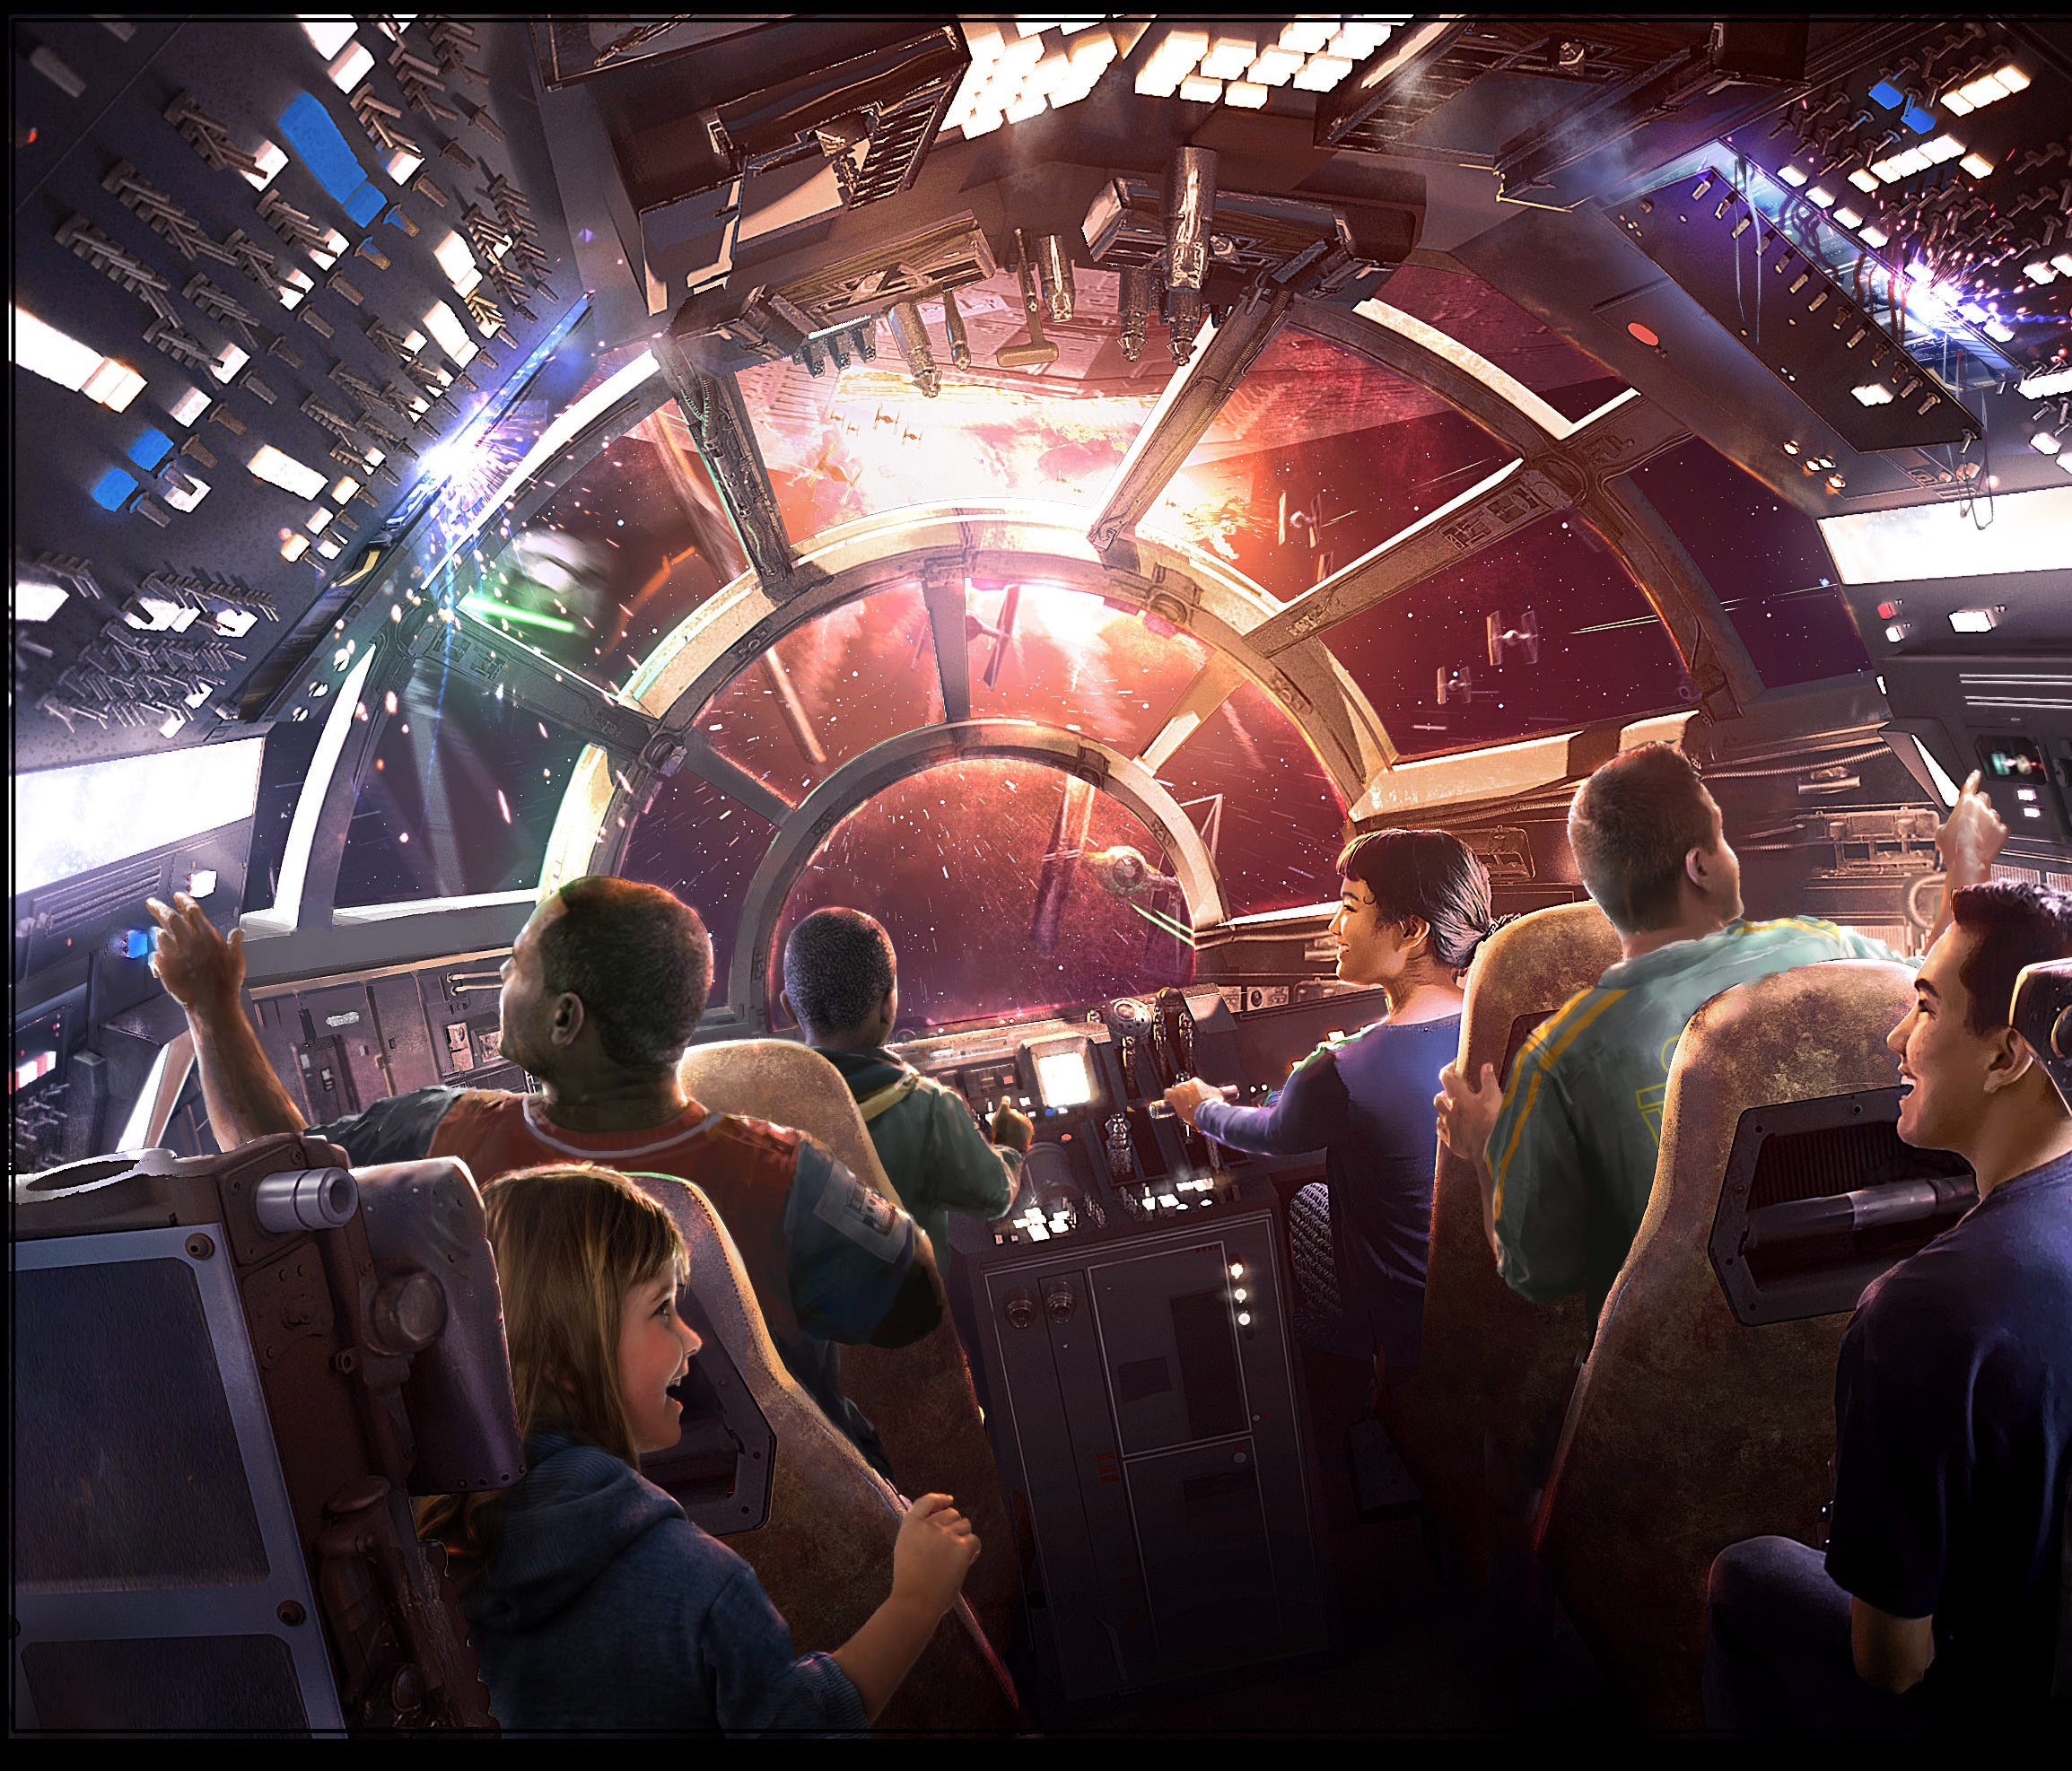 AT D23 EXPO 2017, DISNEY PARKS CHAIRMAN BOB CHAPEK ANNOUNCES NEW DETAILS OF ATTRACTIONS PLANNED FOR STAR WARS: GALAXYÕS EDGE -- Walt Disney Parks & Resorts Chairman Bob Chapek shared new details and a glimpse inside the two attractions planed for Sta